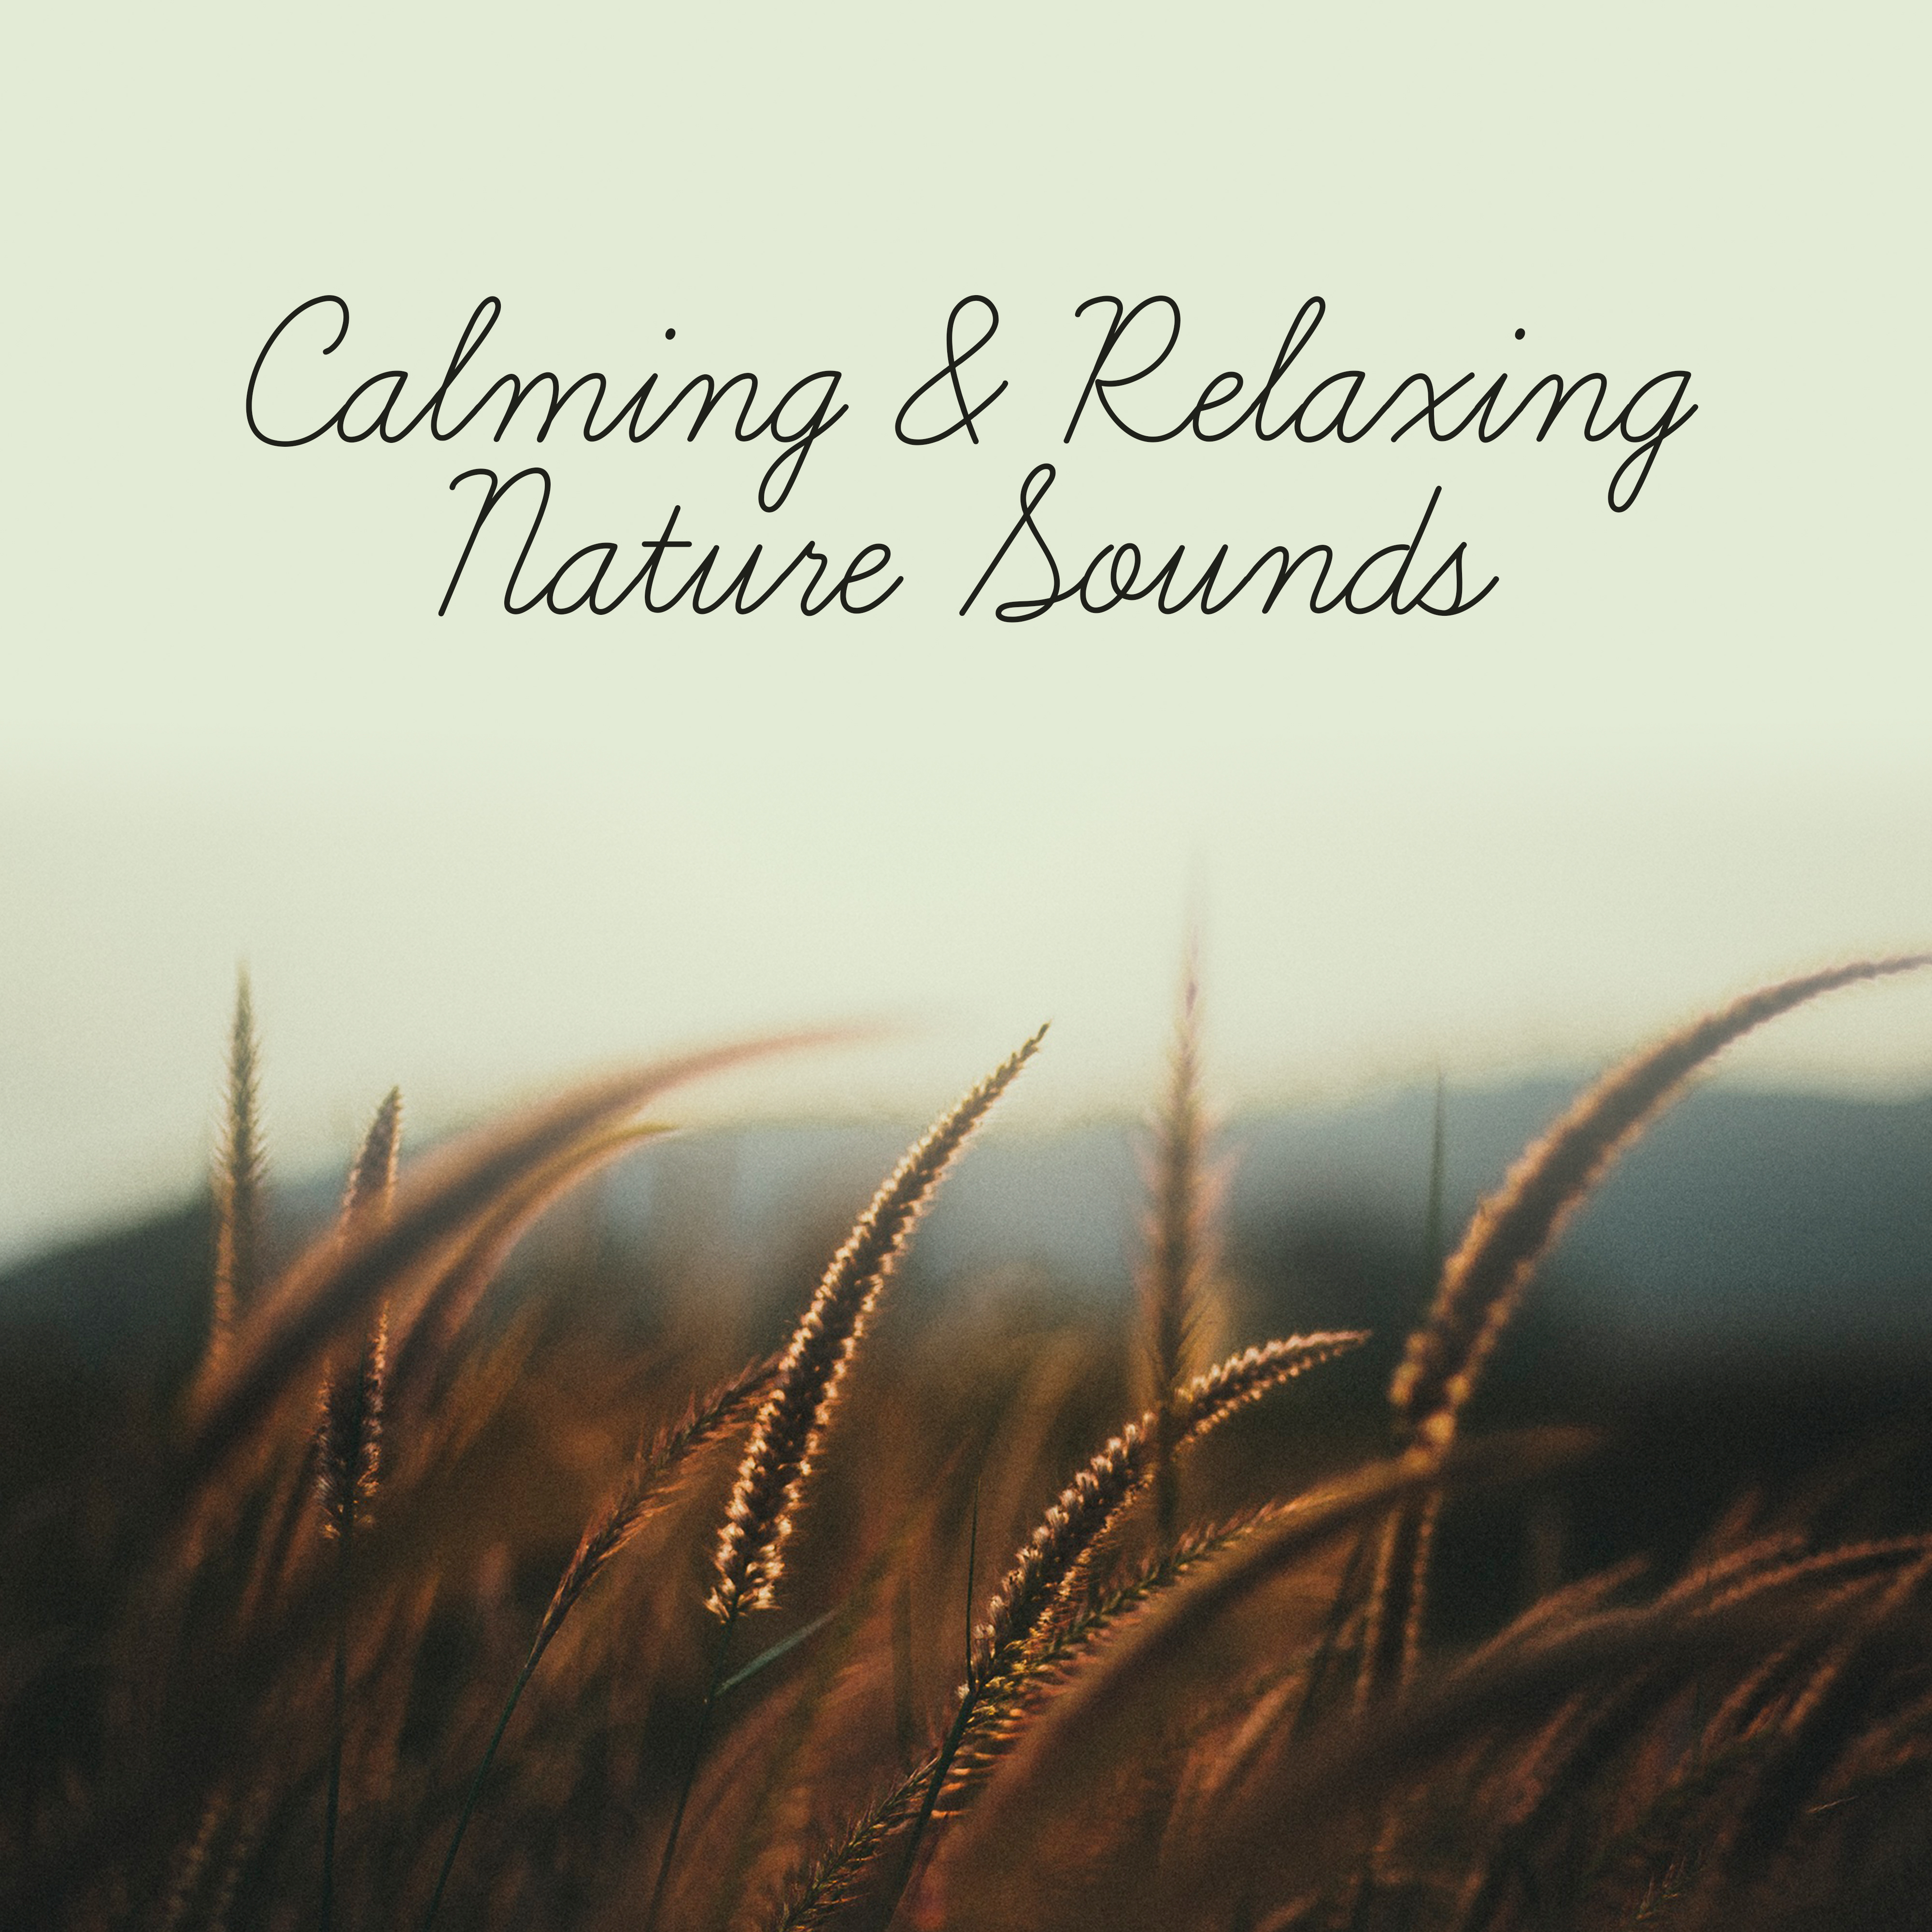 Calming  Relaxing Nature Sounds  Soft Music to Relax, Calm Down with New Age, Rest Yourself